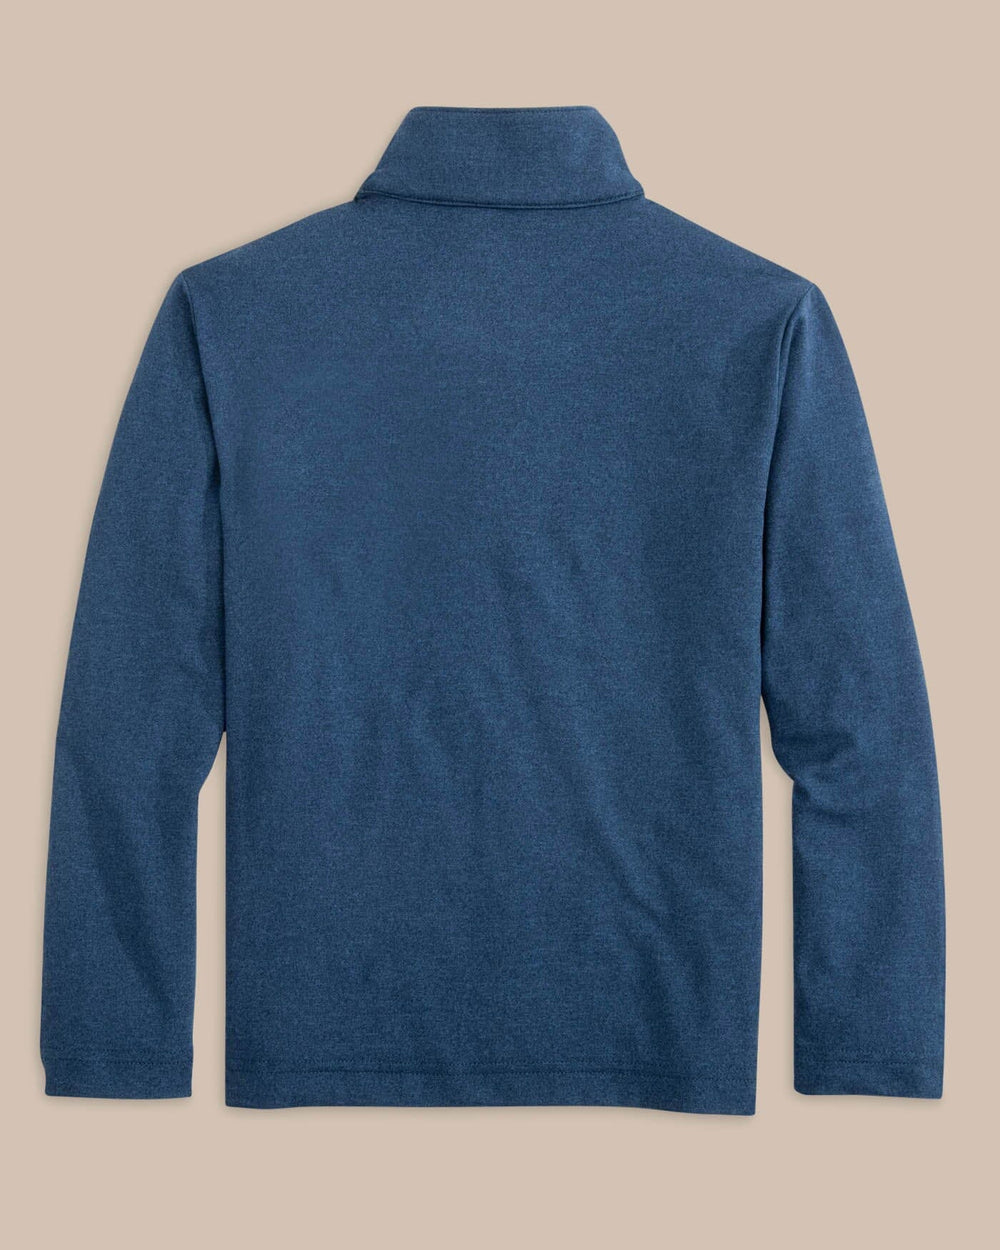 The back view of the Southern Tide Boys Heather Cruiser Quarter Zip by Southern Tide - Heather Dress Blue